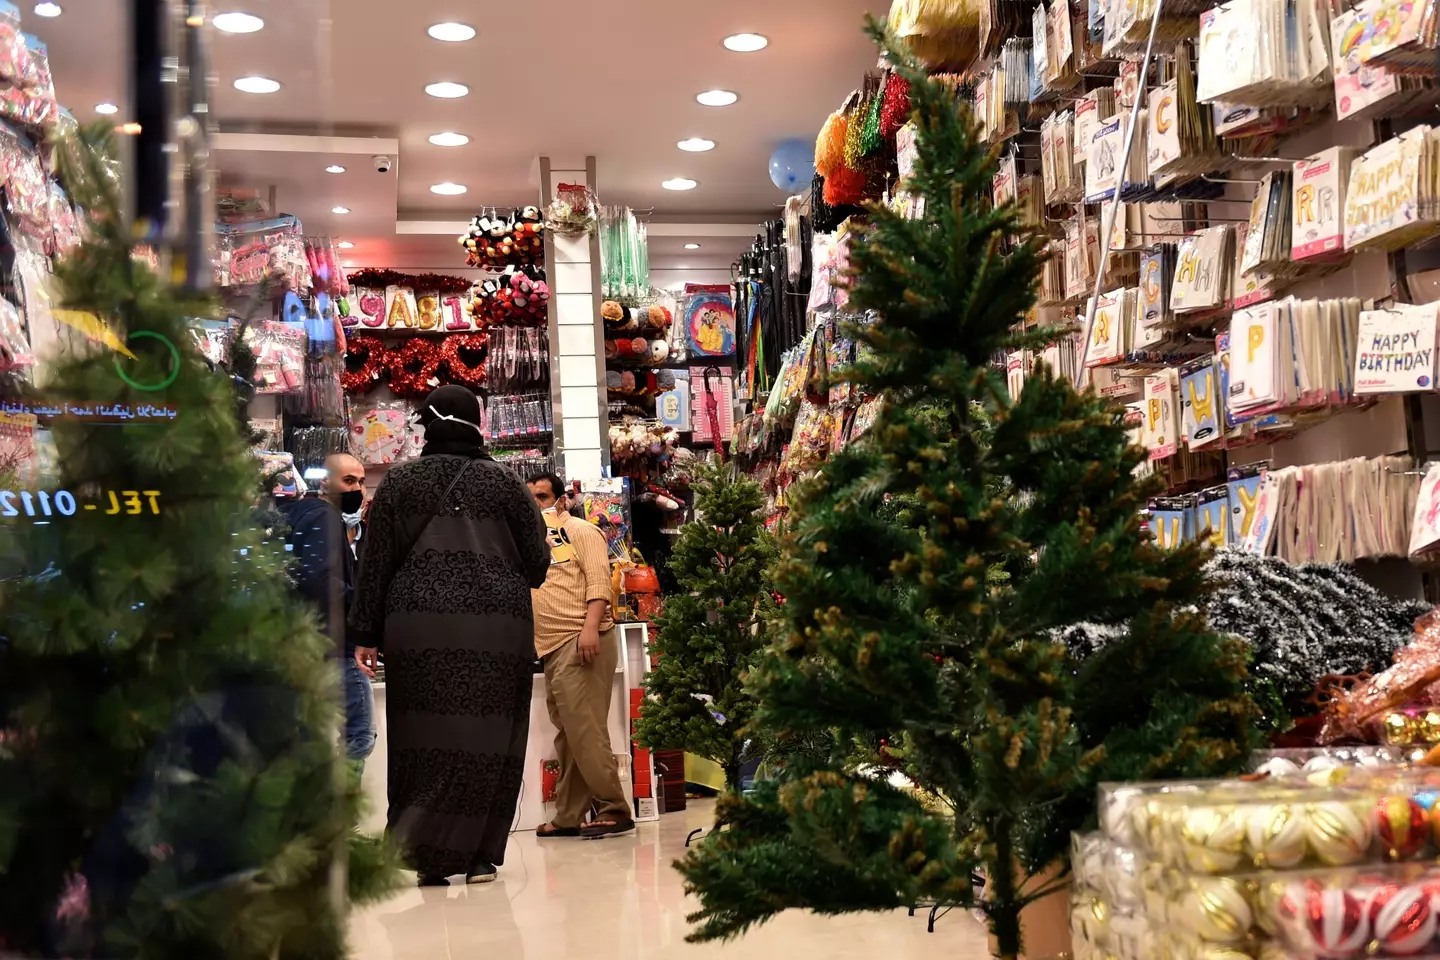 People are starting to push the boundaries of the Christmas ban in Saudi Arabia.